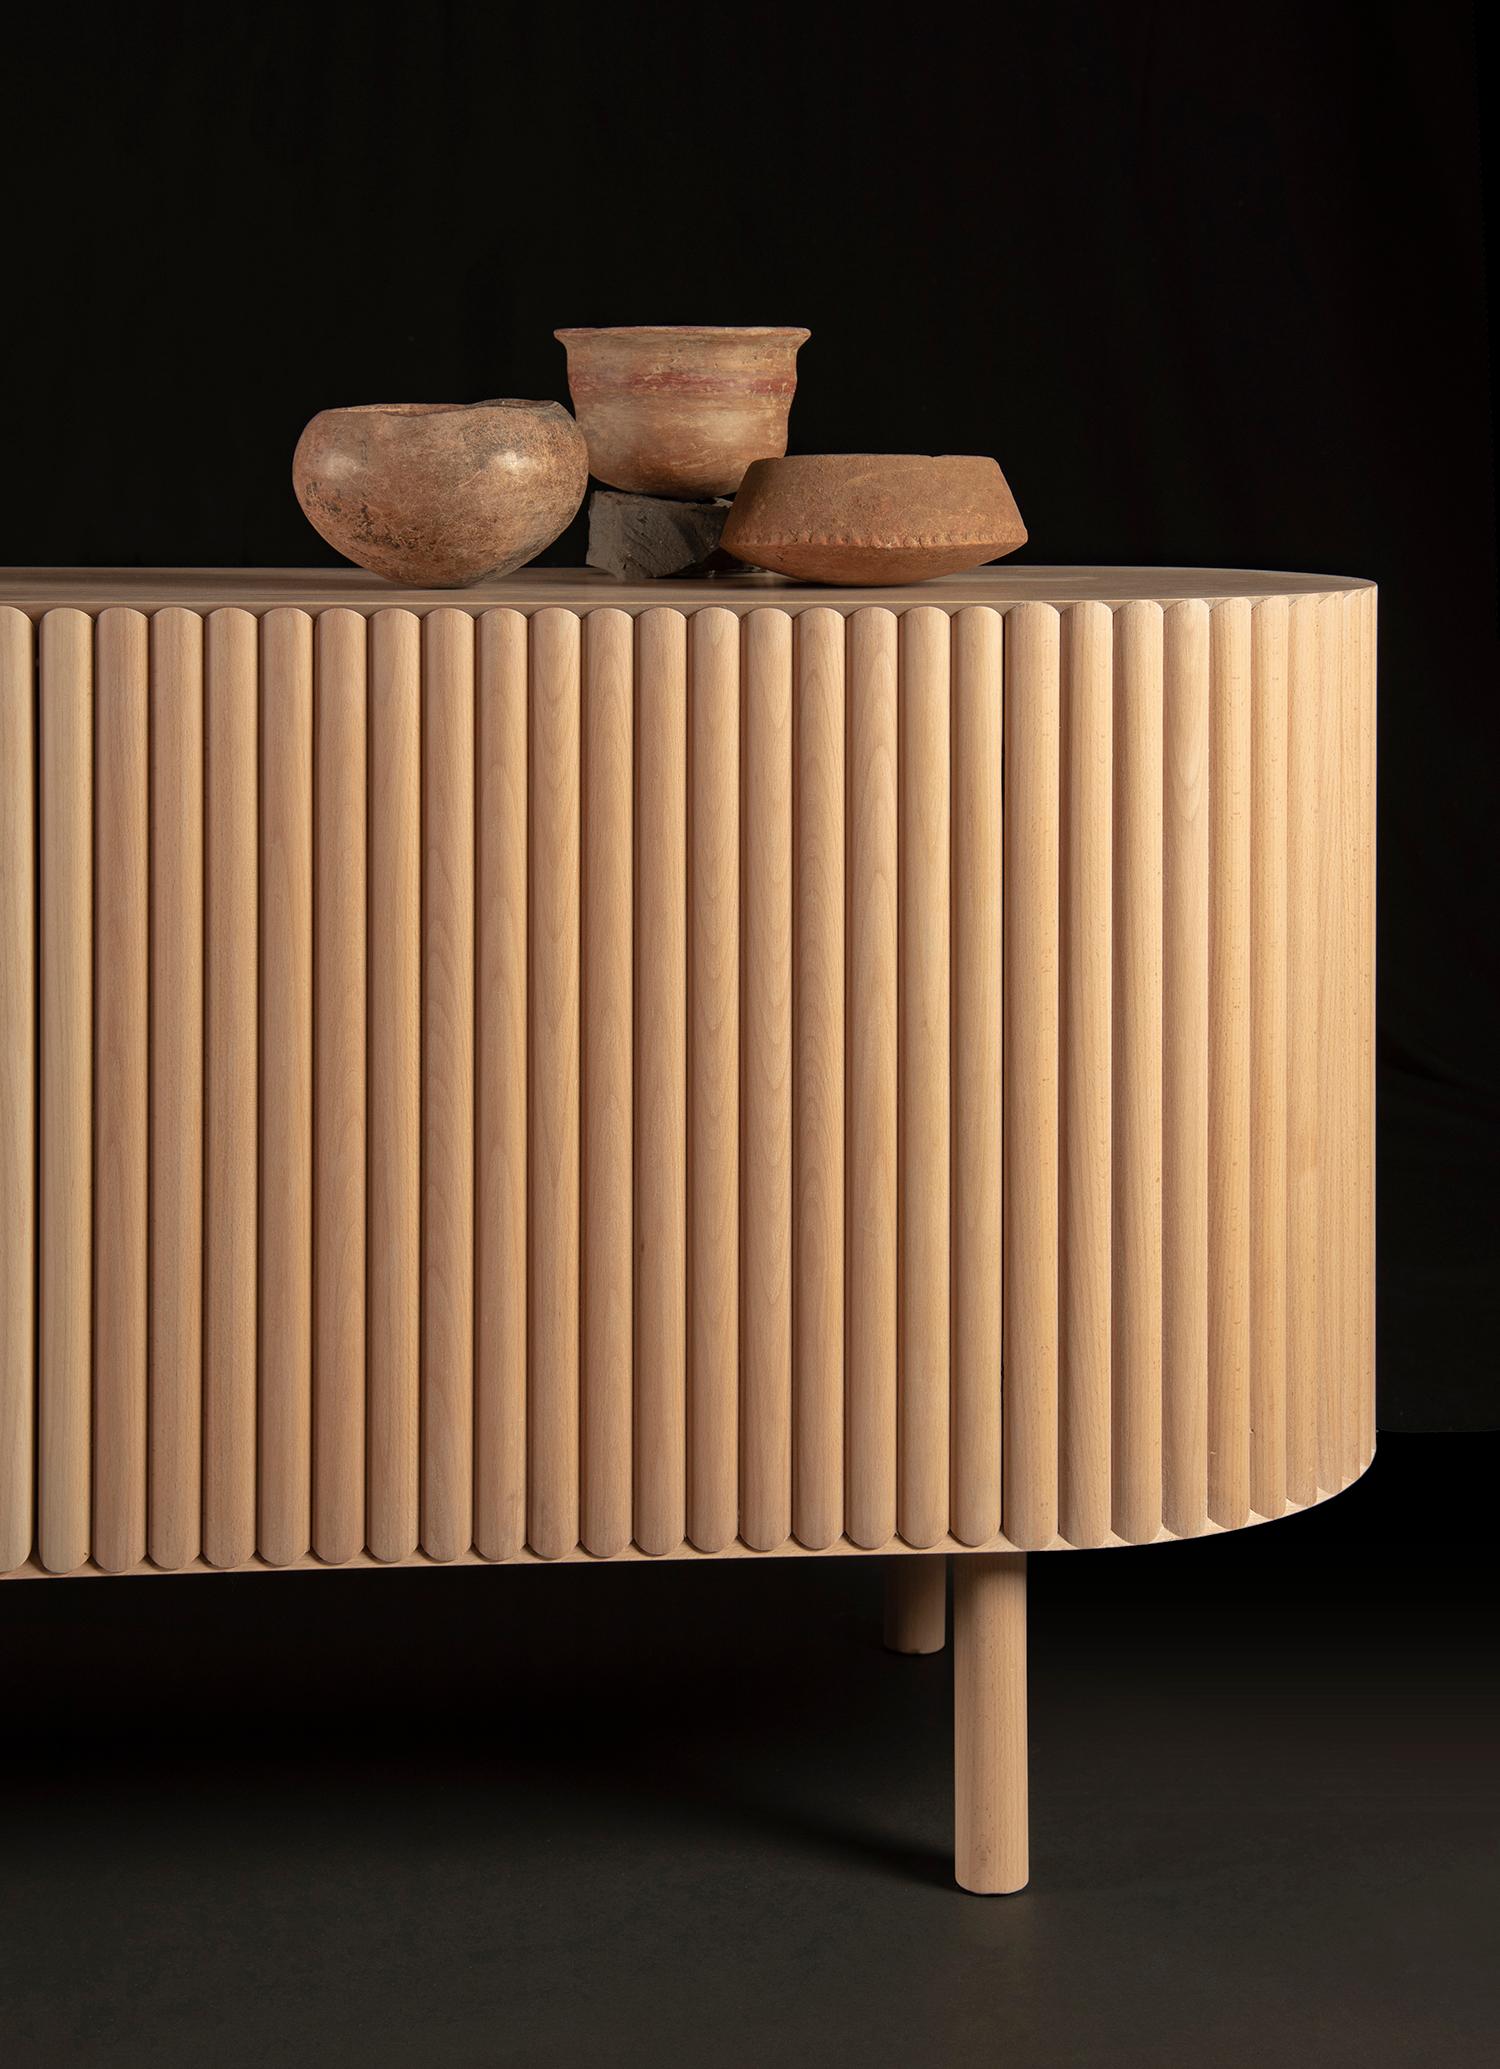 Slatted Beech Wood Rima Credenza by Peca, Customizable In New Condition For Sale In Brooklyn, NY